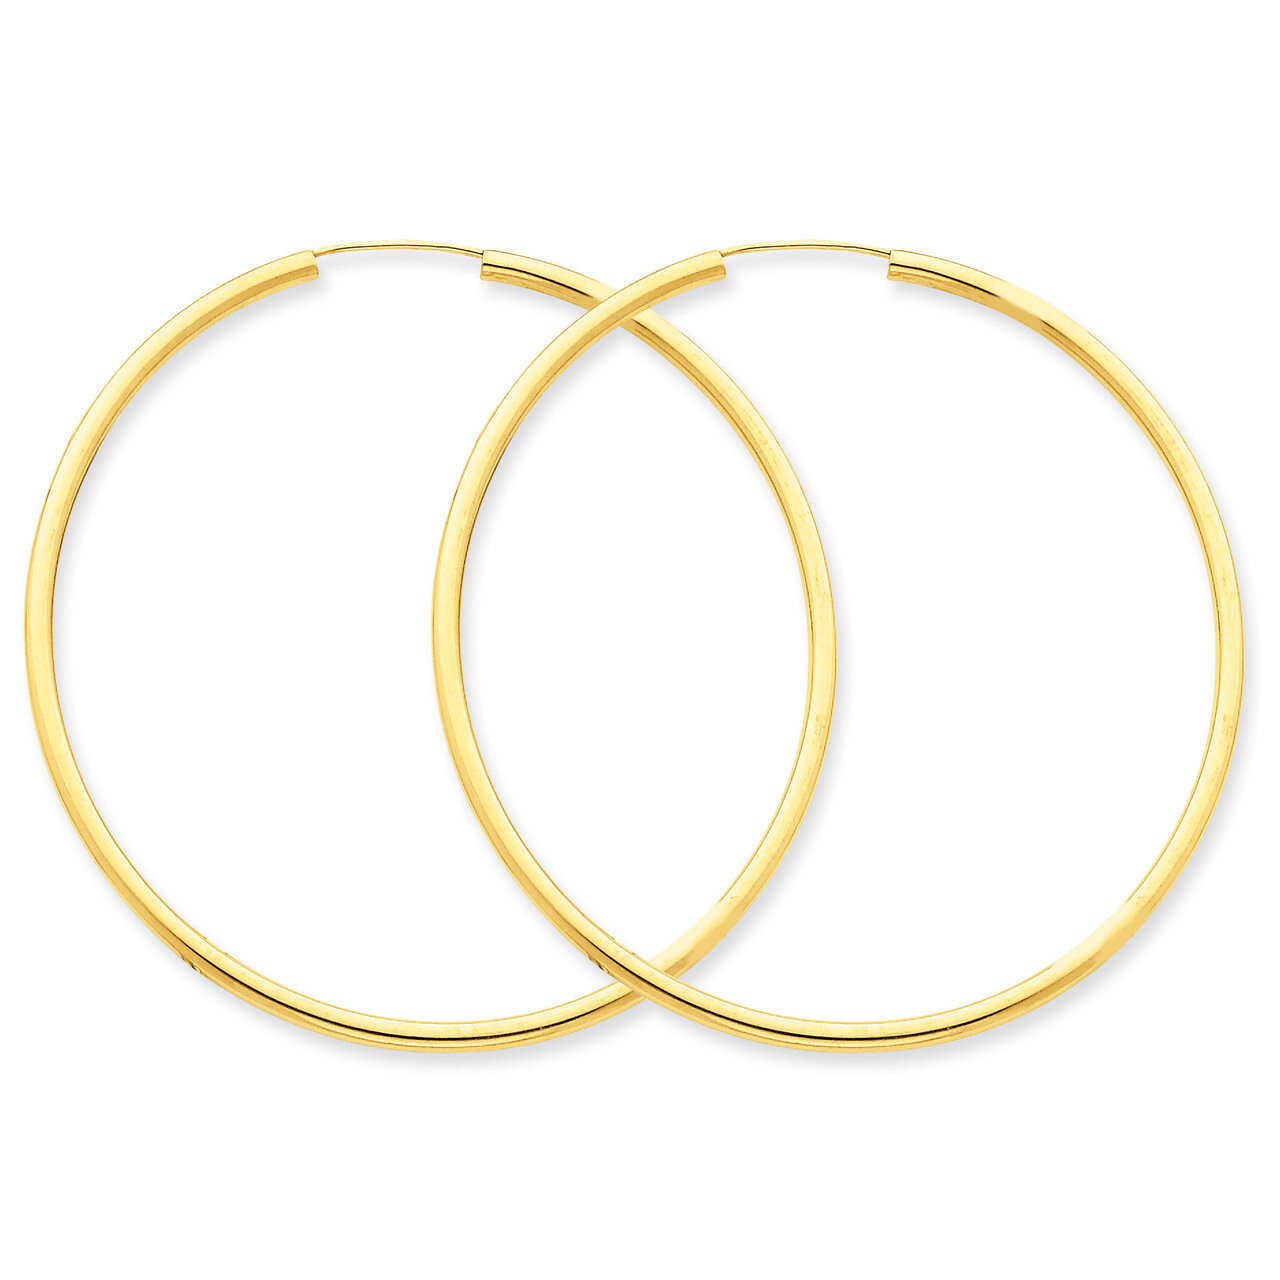 Round Endless 2mm Hoop Earrings 14k Gold Polished H986